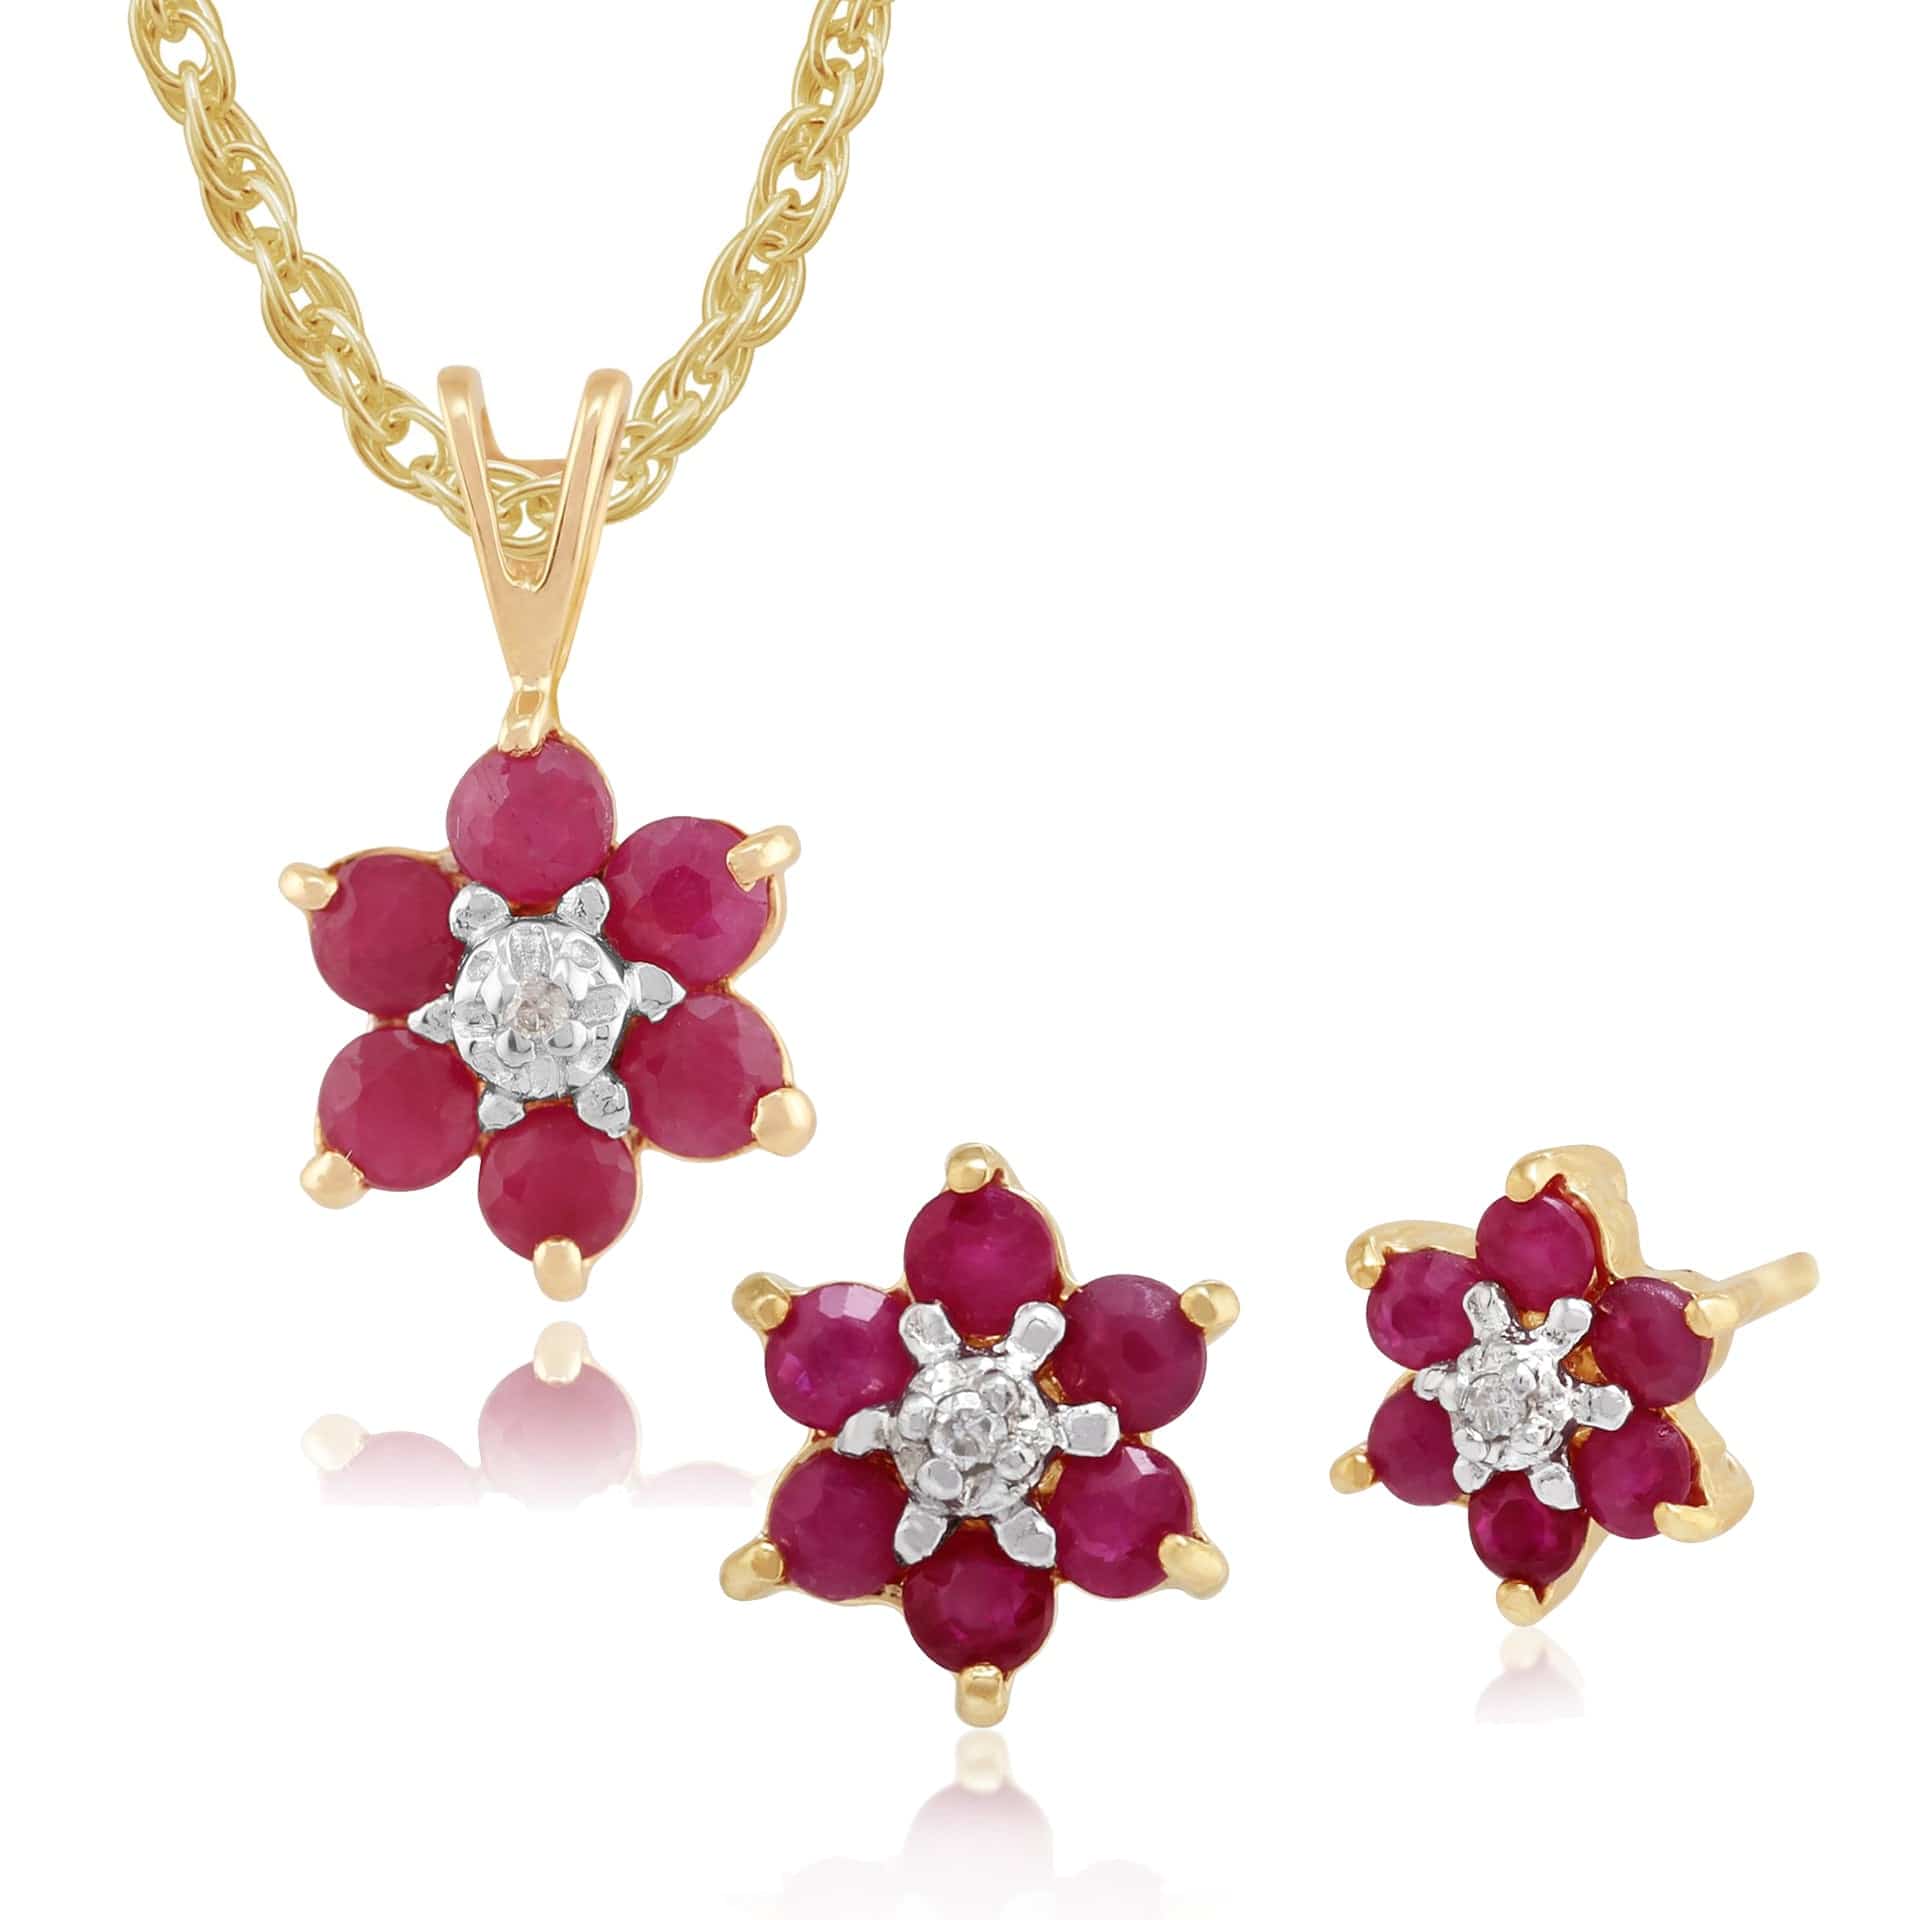 10498-10190 Floral Round Ruby & Diamond Flower Cluster Stud Earrings & Pendant Set in 9ct Yellow Gold 1